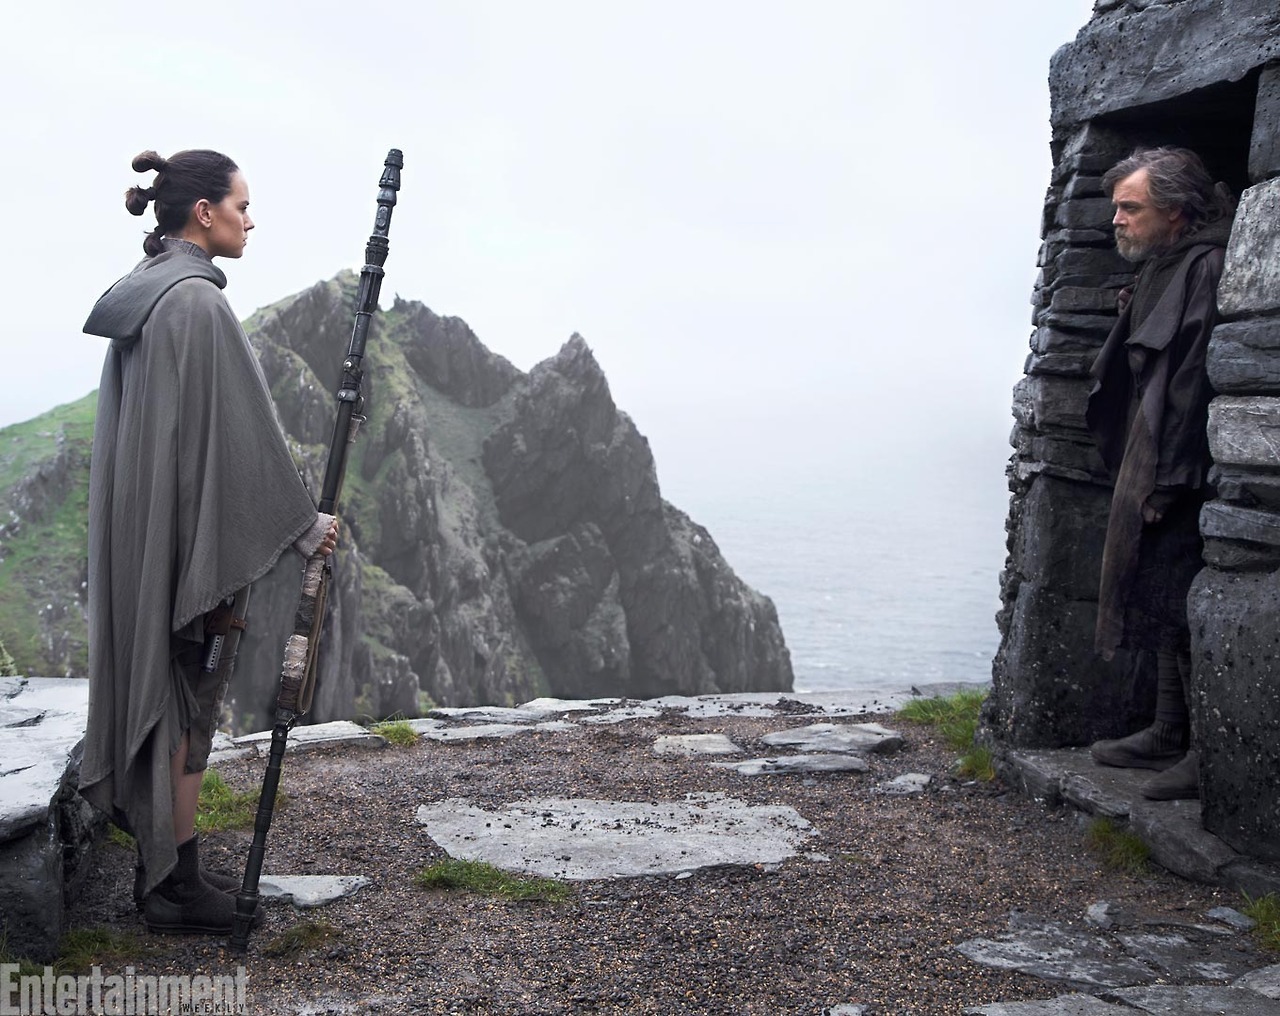 Entertainment Weekly's latest 'Star Wars: The Last Jedi' photos show off new alien races